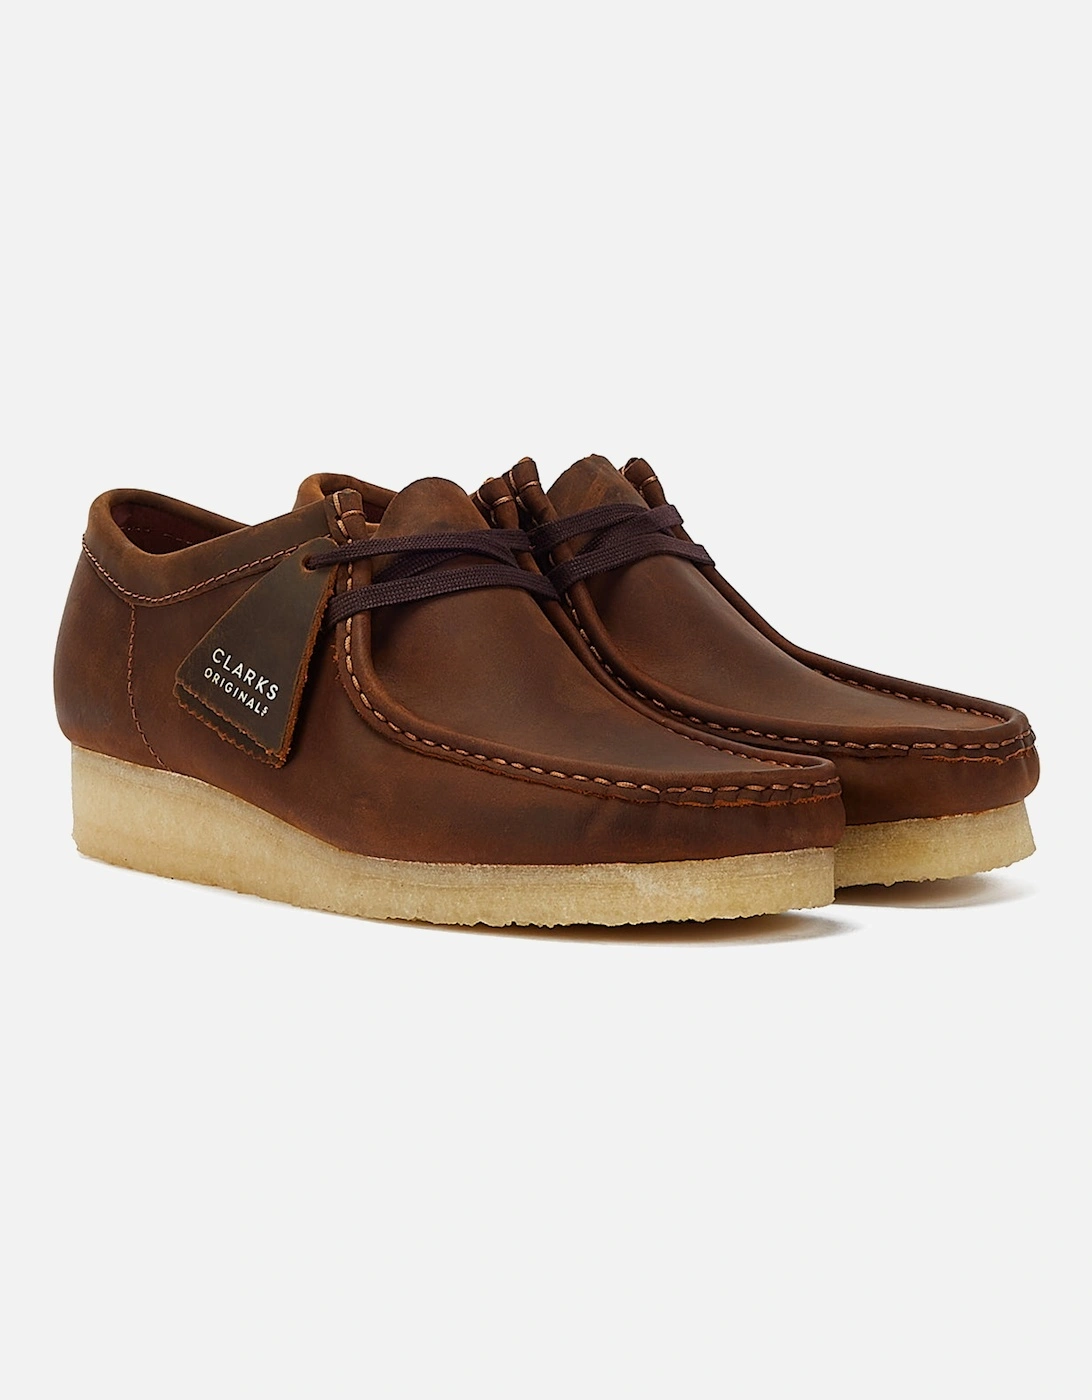 Wallabee Beeswax Men's Brown Lace-Up Shoes, 9 of 8